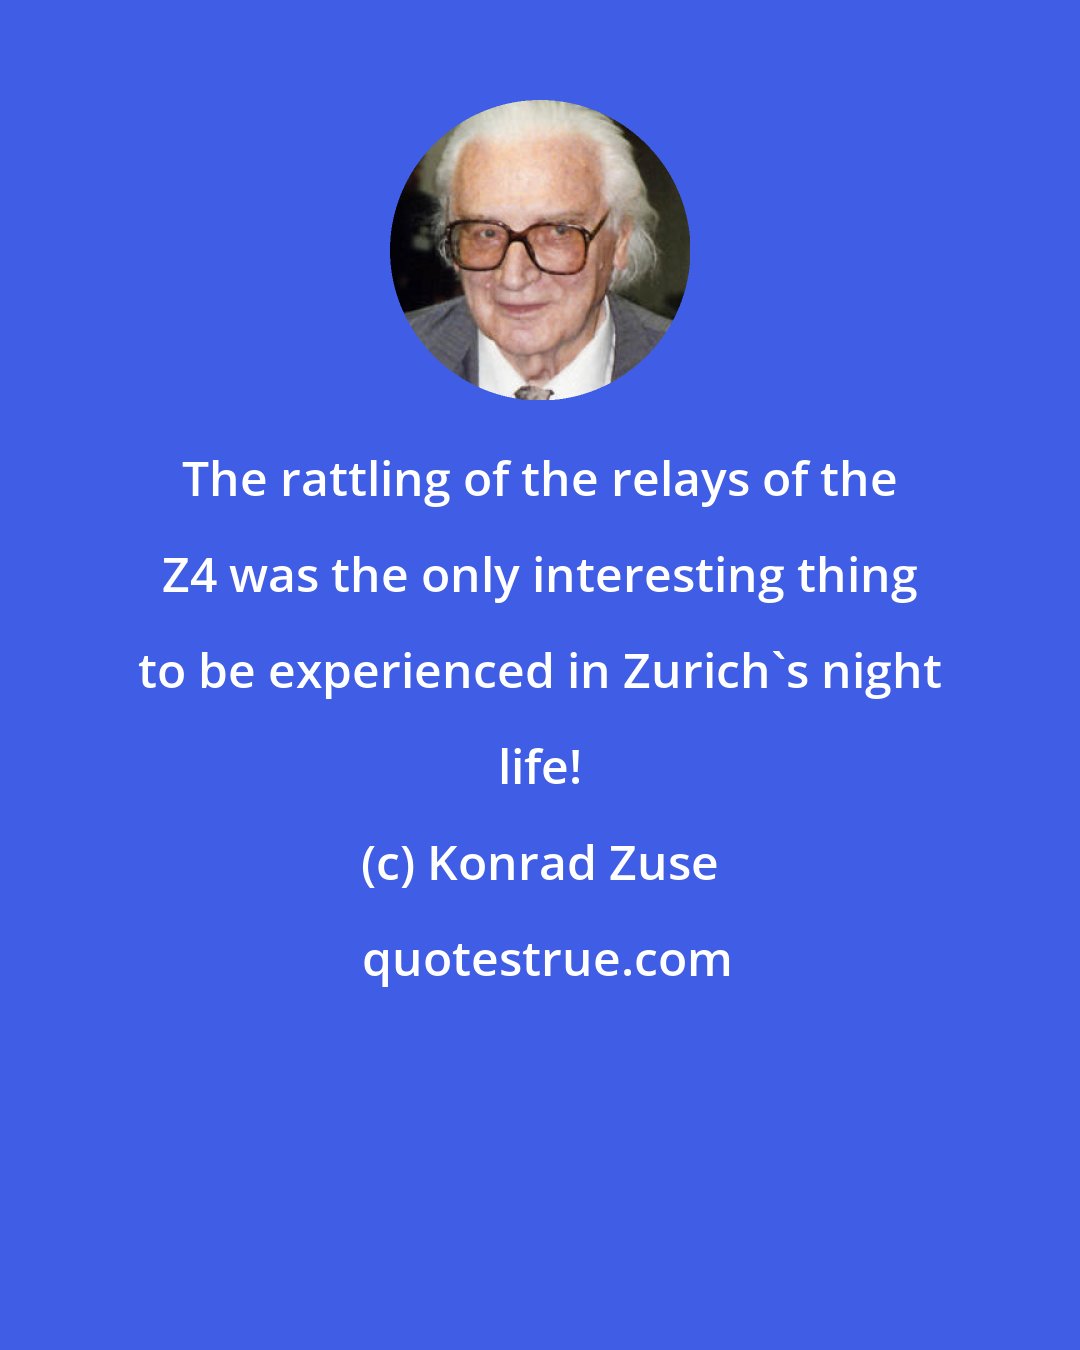 Konrad Zuse: The rattling of the relays of the Z4 was the only interesting thing to be experienced in Zurich's night life!